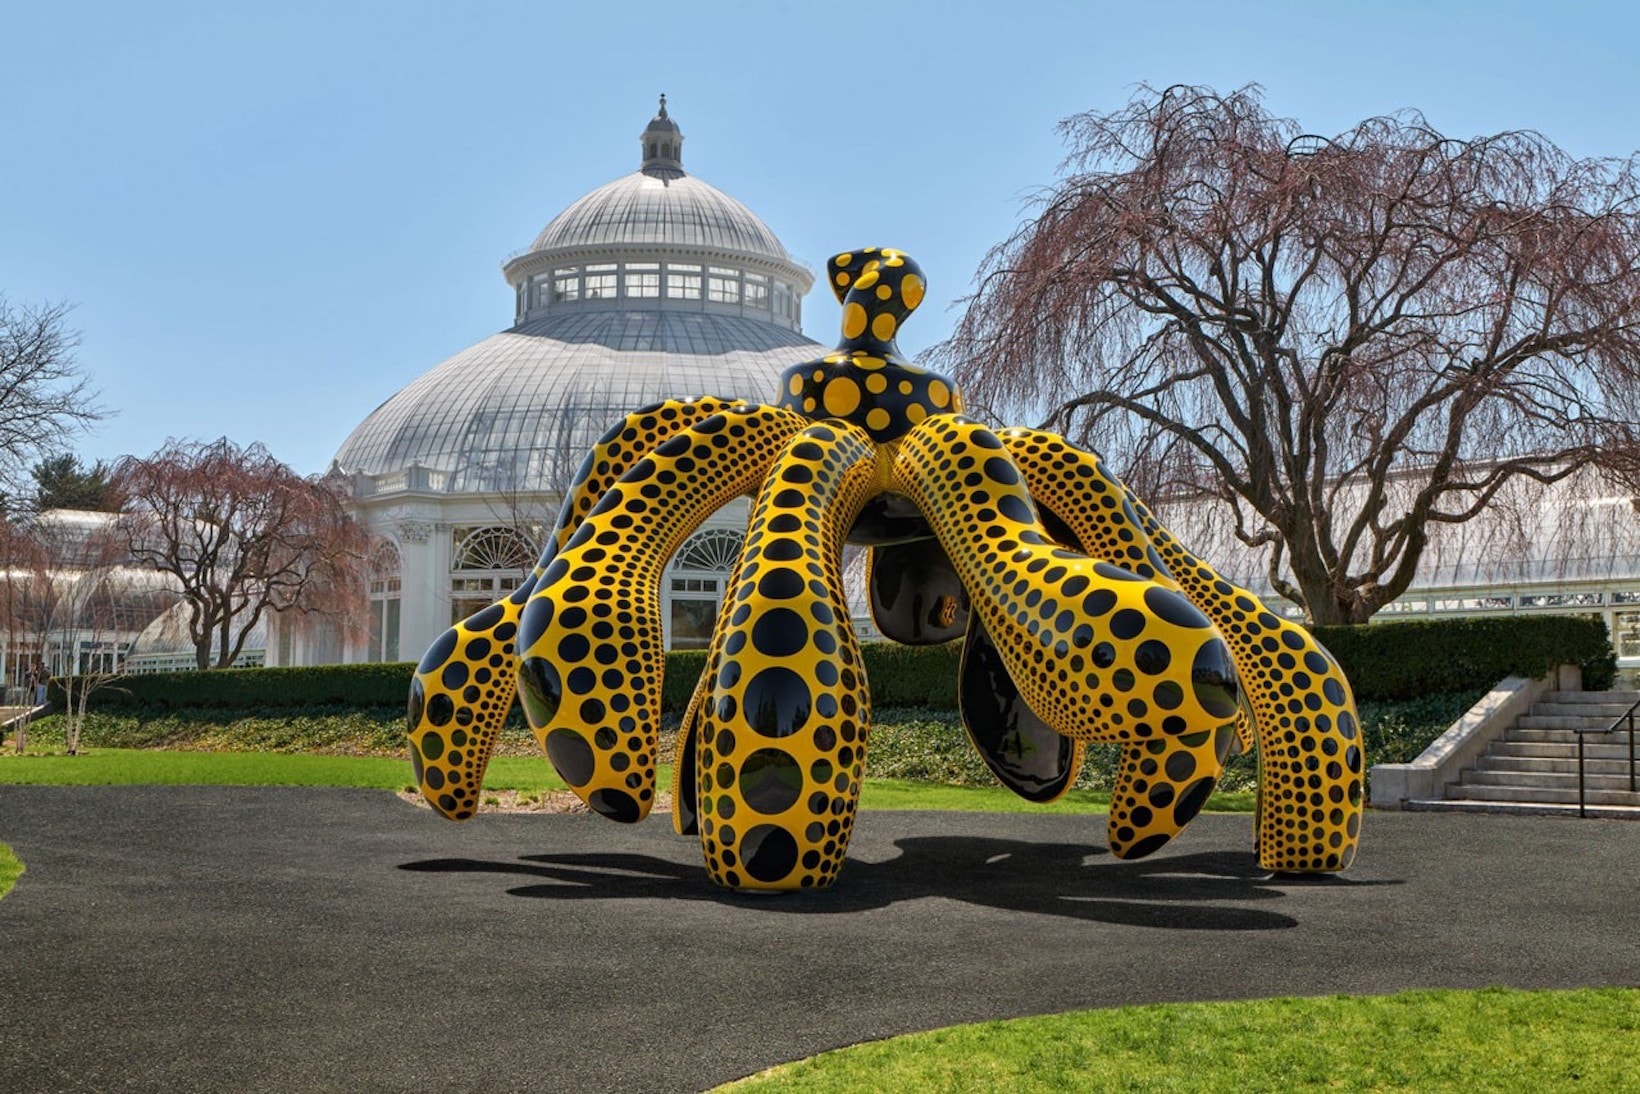 https://image-cdn.hypb.st/https%3A%2F%2Fhypebeast.com%2Fwp-content%2Fblogs.dir%2F6%2Ffiles%2F2021%2F04%2Fyayoi-kusama-new-york-botanical-garden-cosmic-nature-exhibition-nyc-location-tickets-where-to-buy-2.jpg?cbr=1&q=90